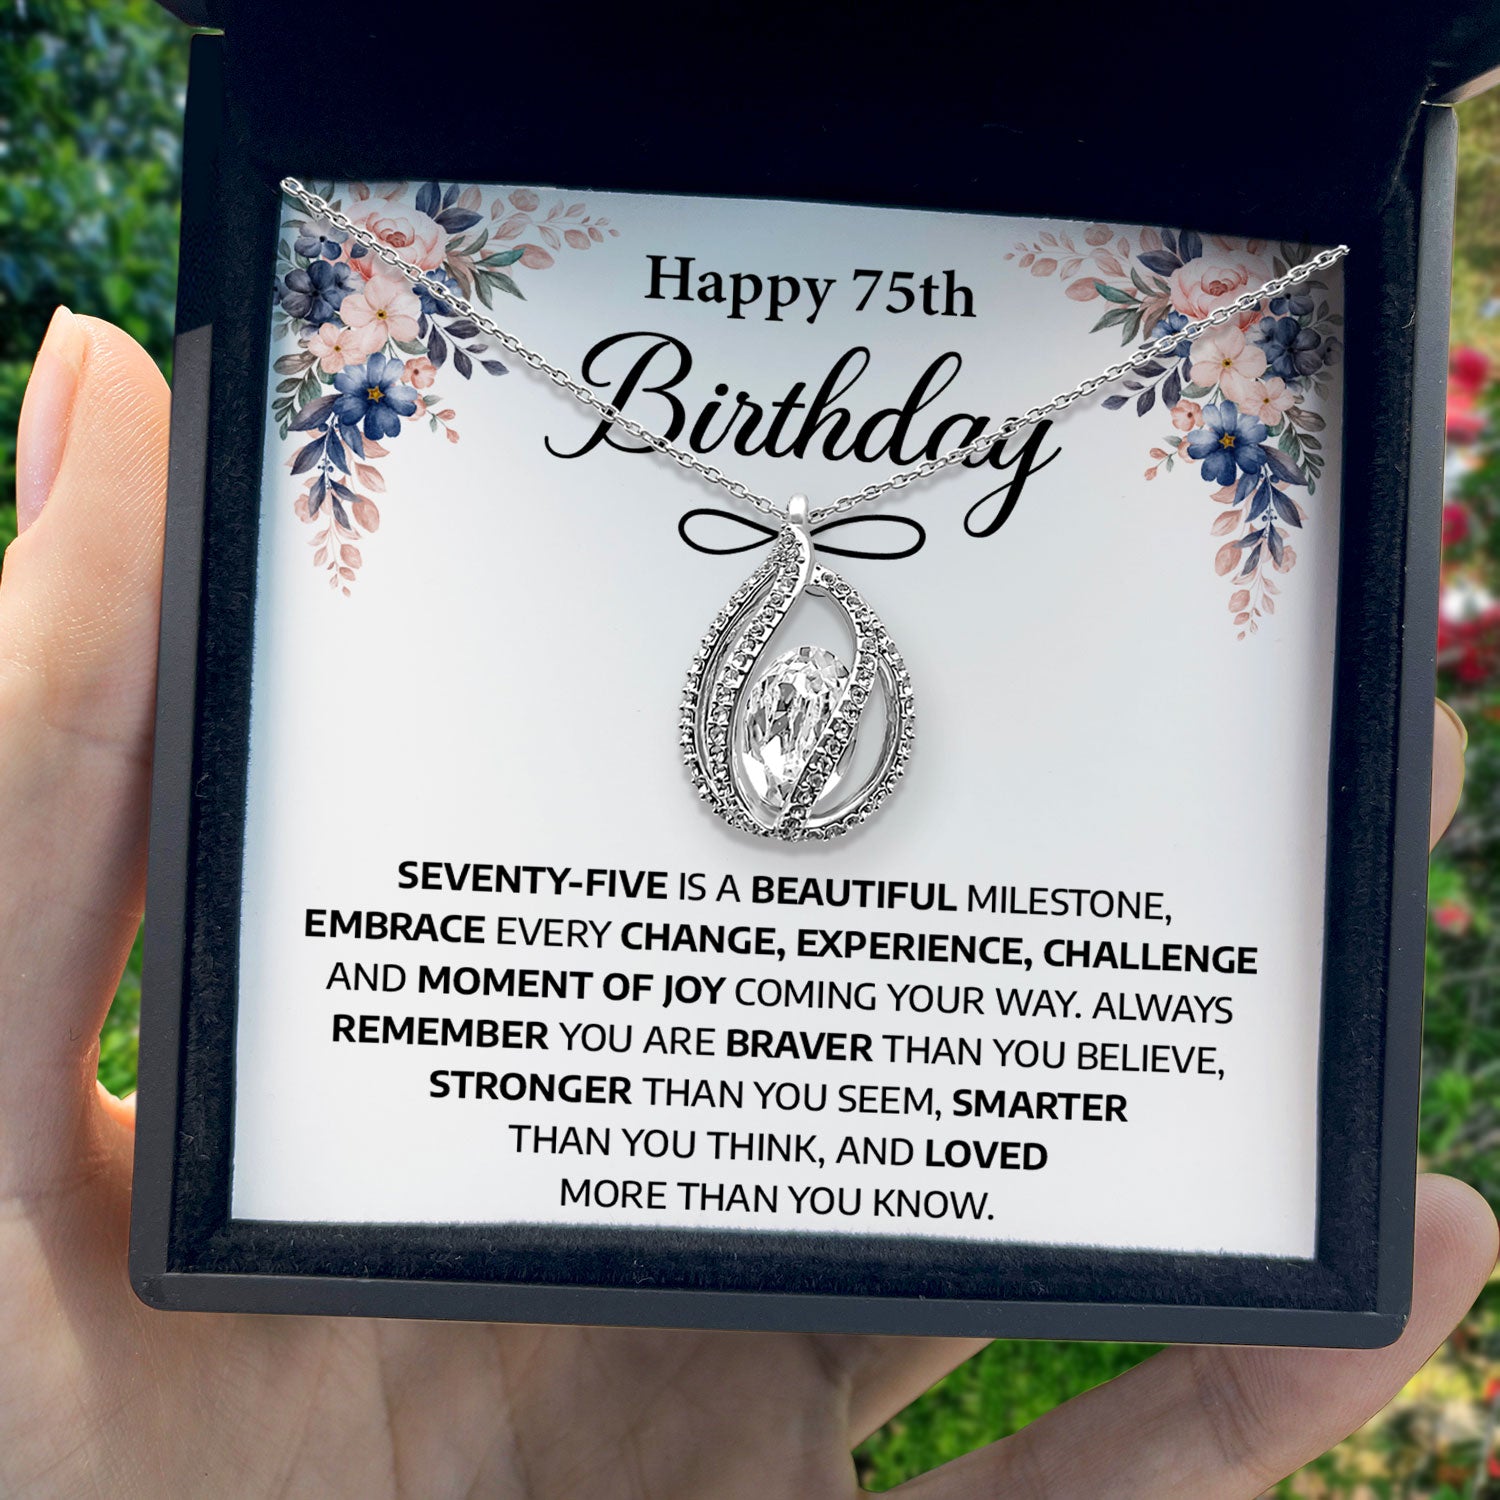 75th Birthday Gifts for Her - Orbital Birdcage Necklace